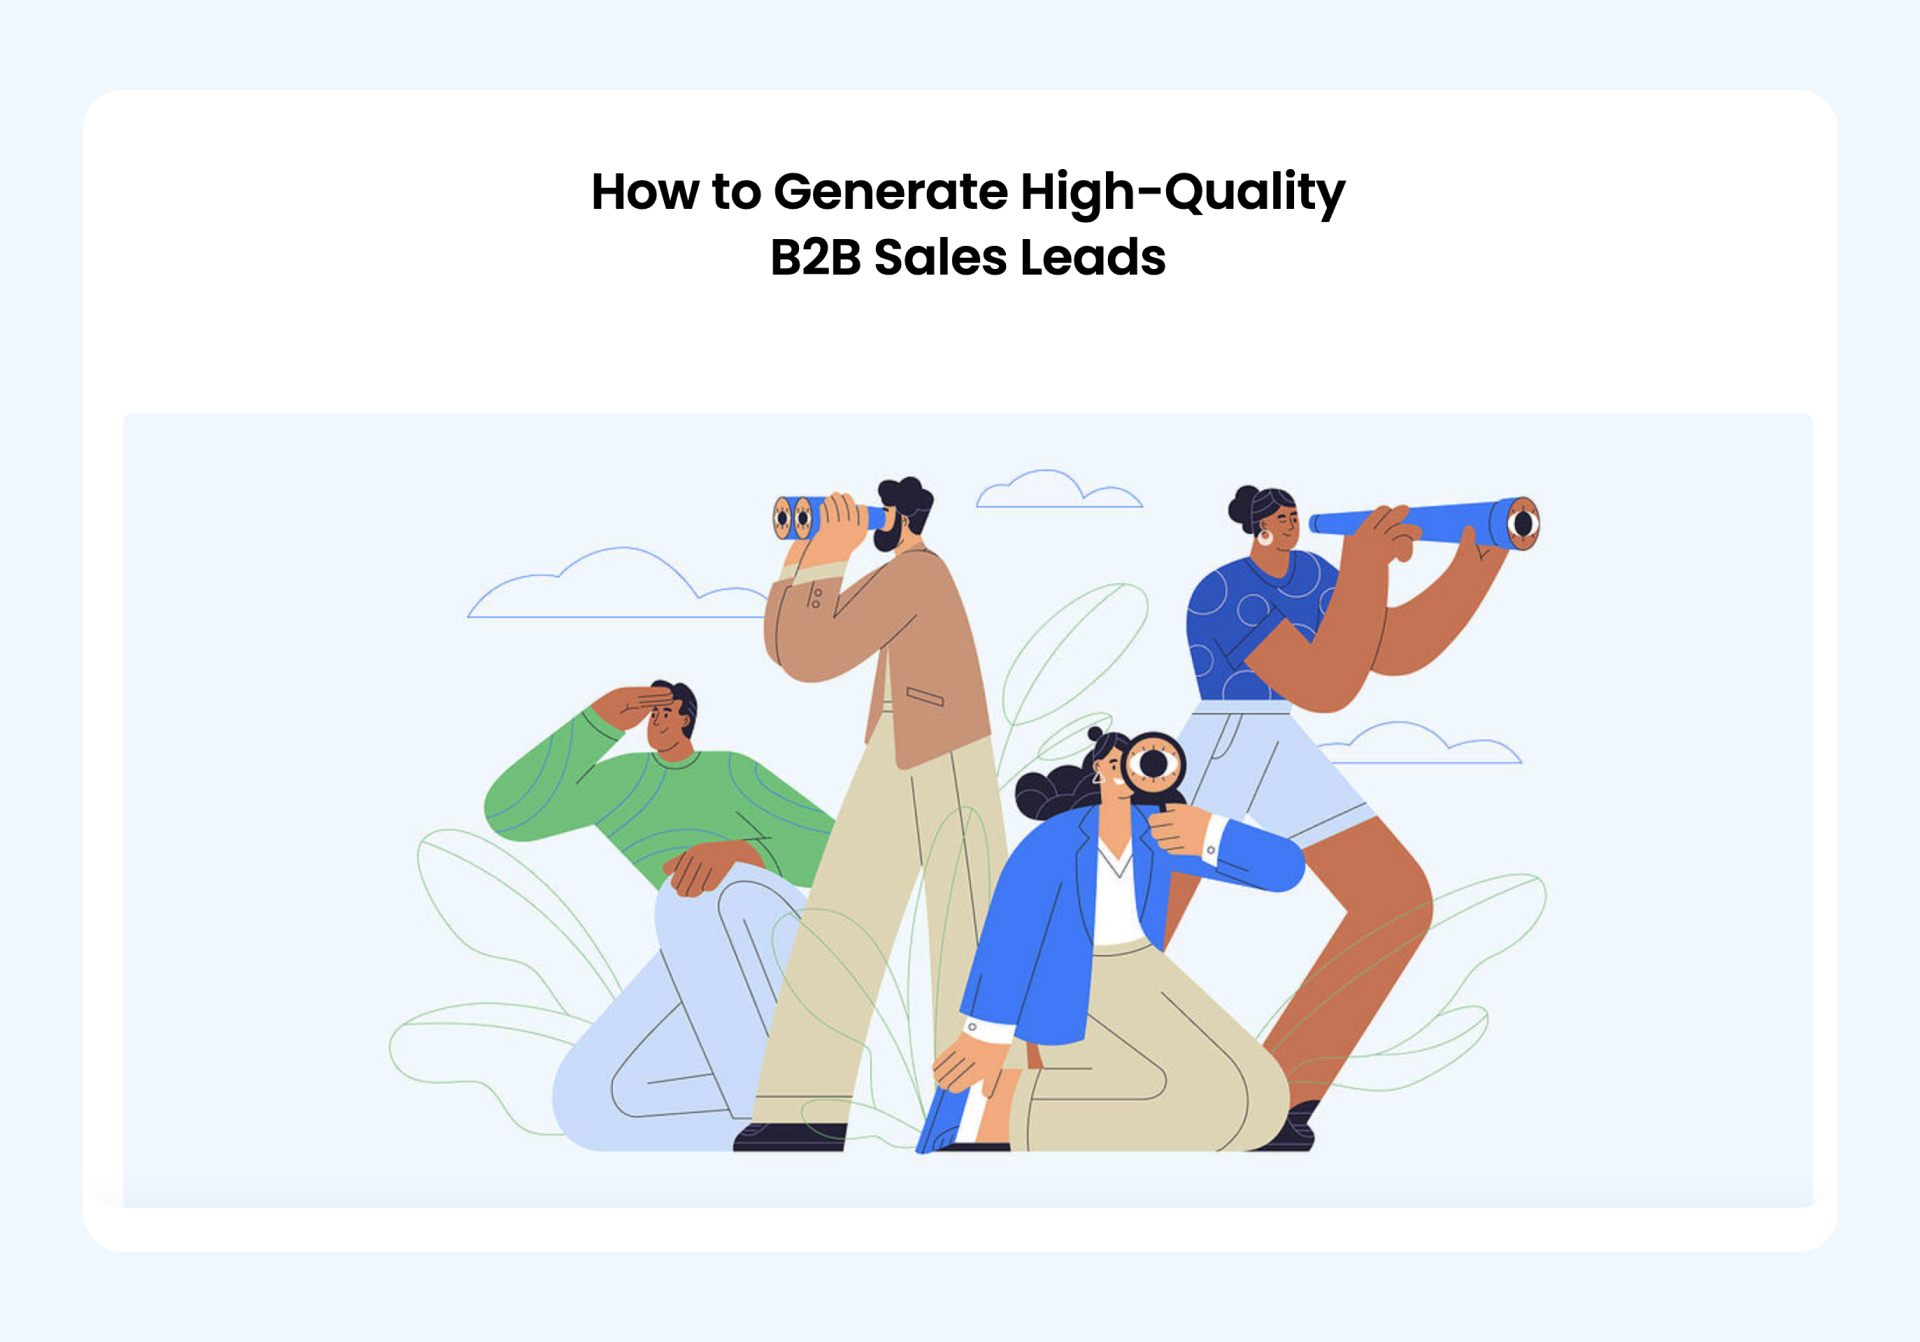 How to Generate High-Quality B2B Sales Leads